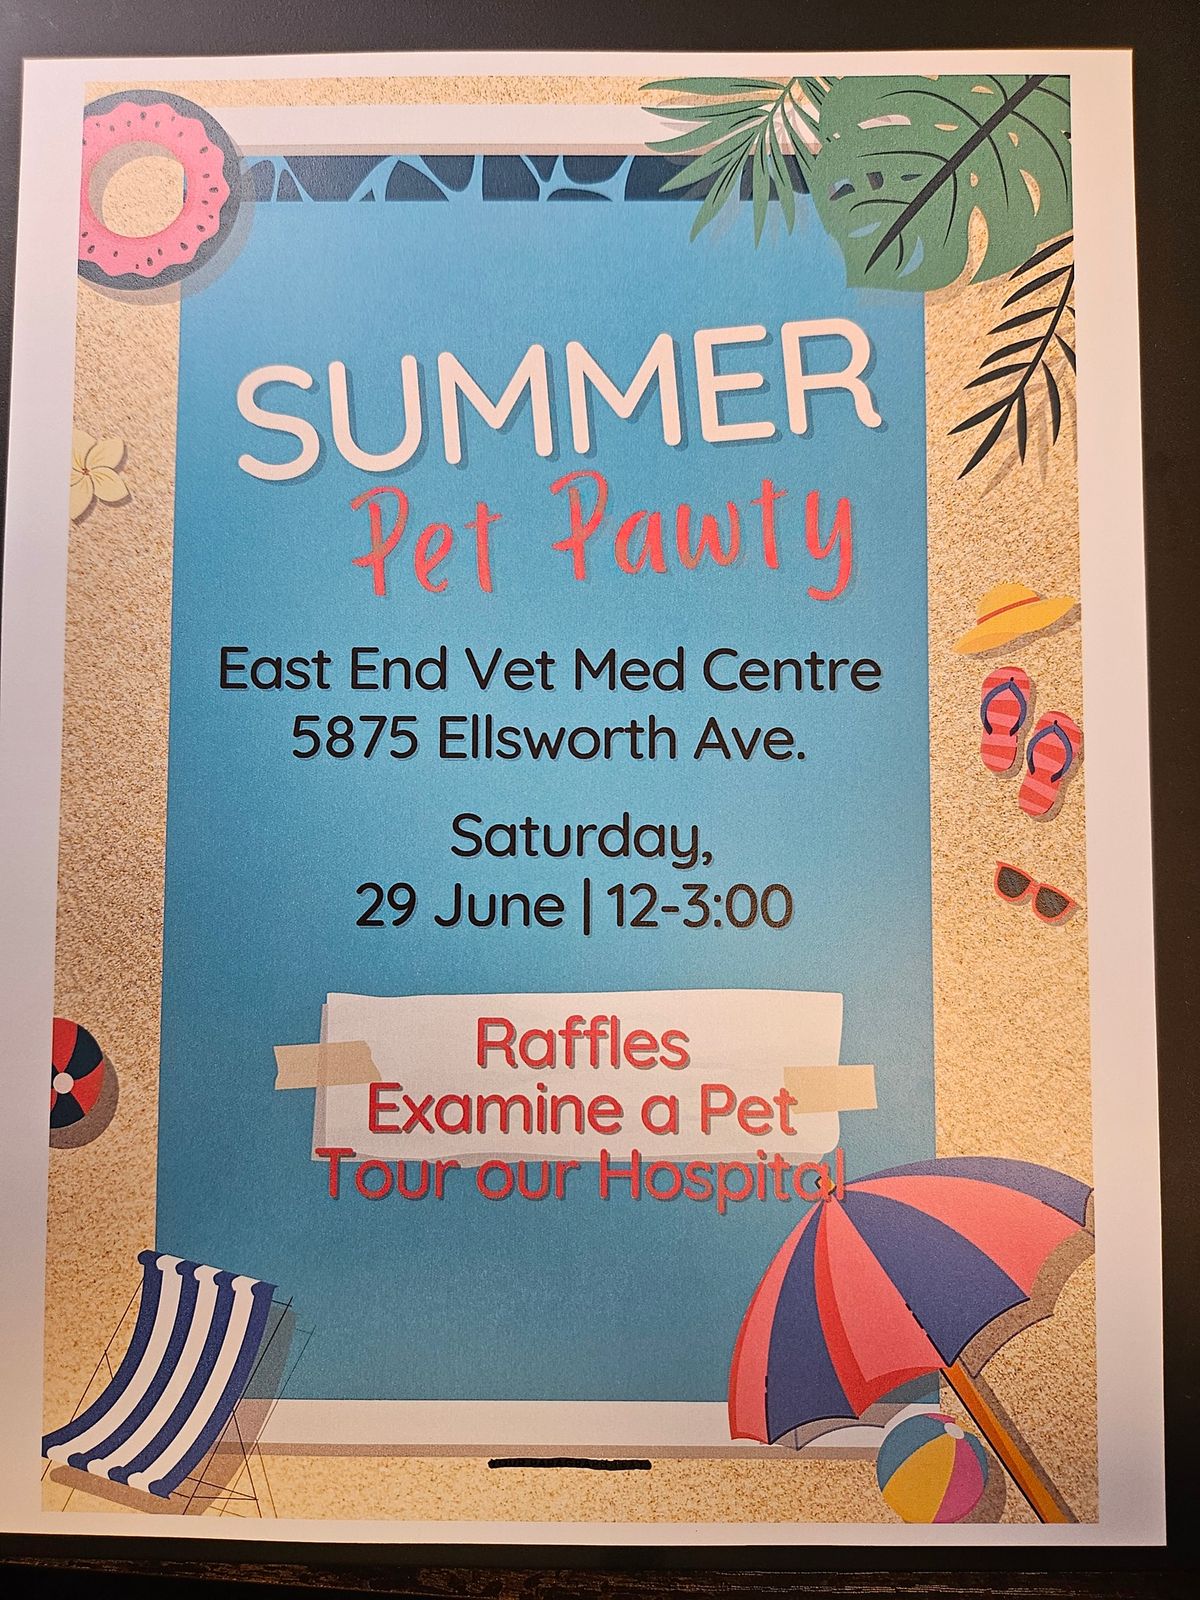 East End Veterinary Medical Centre Grand Reopening